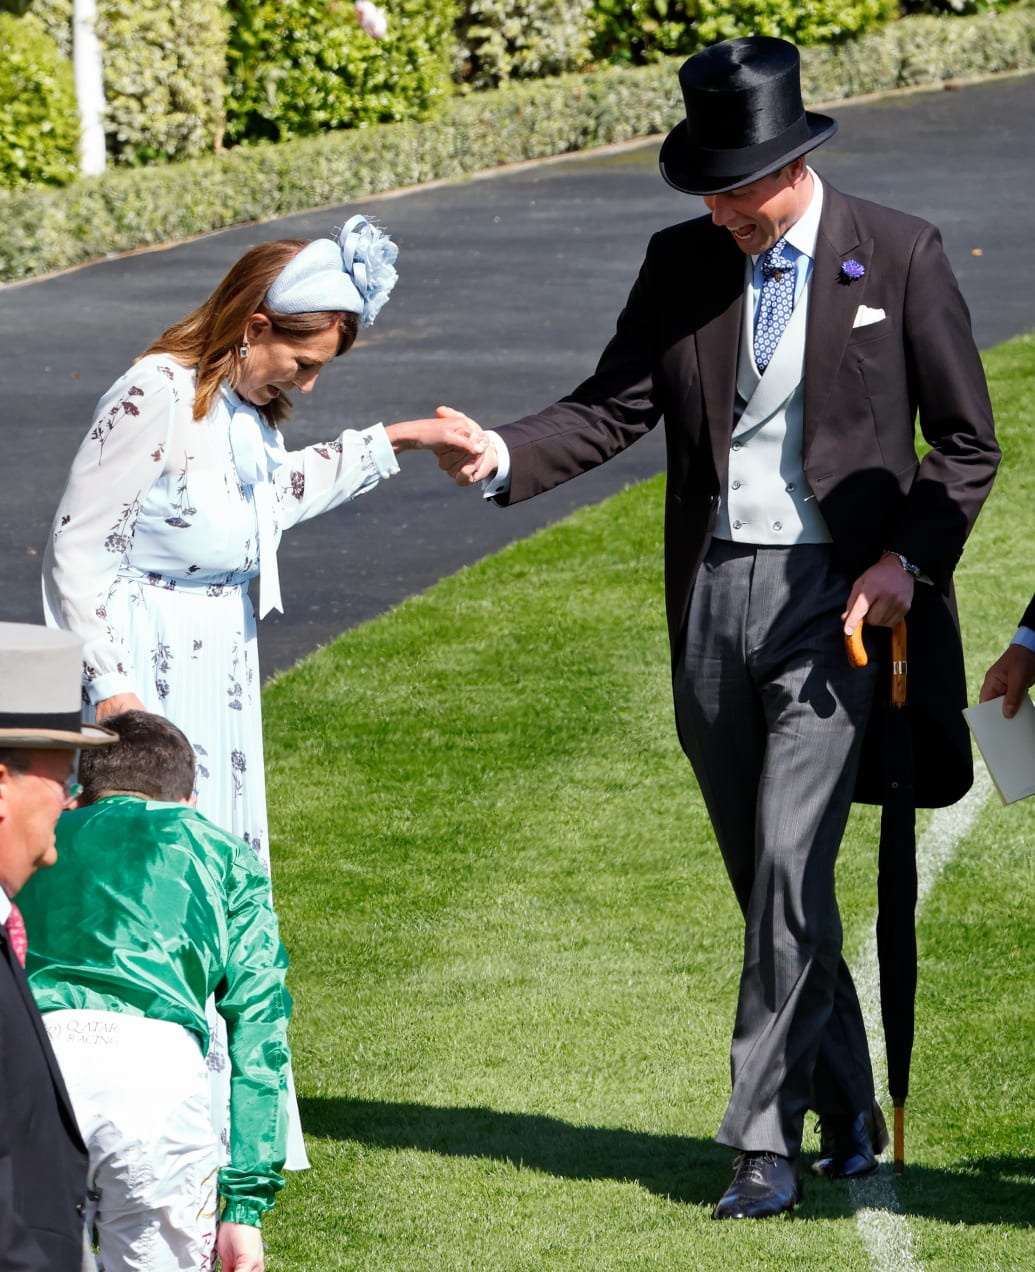 Prince William, Prince of Wales assists Carole Middleton as she gets the heel of her shoe stuck in the grass on day two of Royal Ascot 2024 at Ascot Racecourse on June 19, 2024 in Ascot, England.